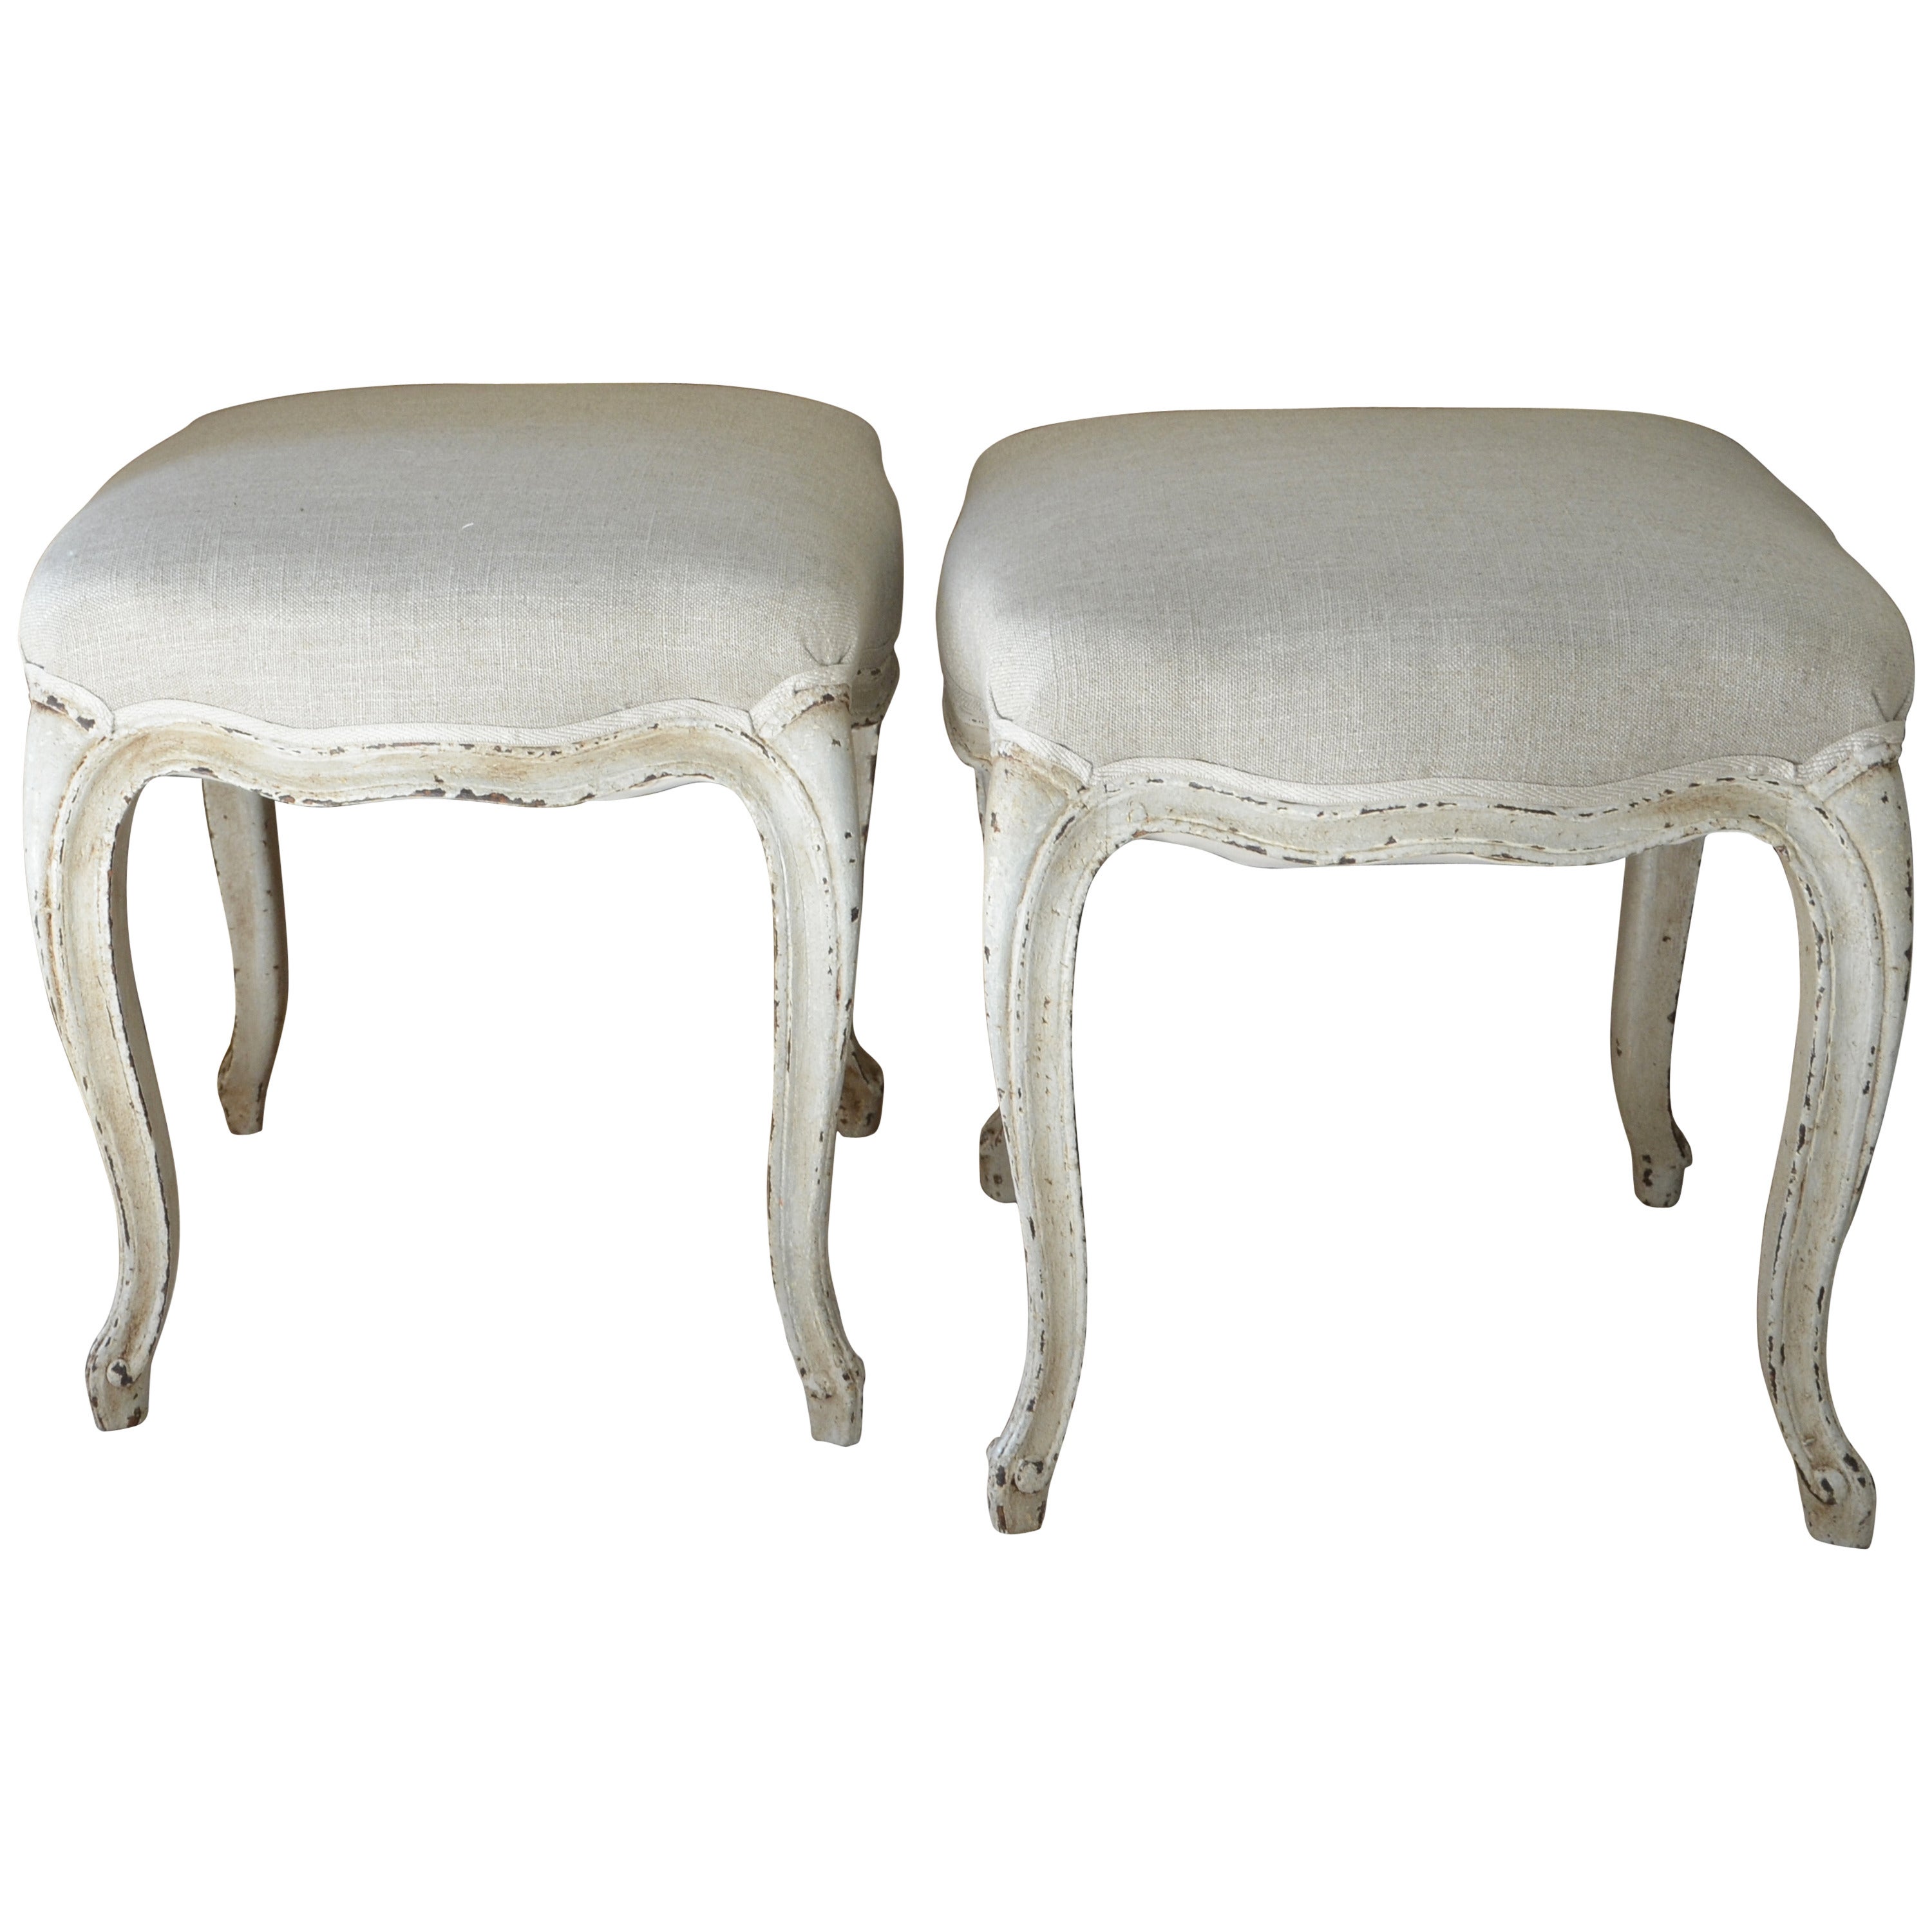 Pair of French Louis XV Style Painted Foot Stool